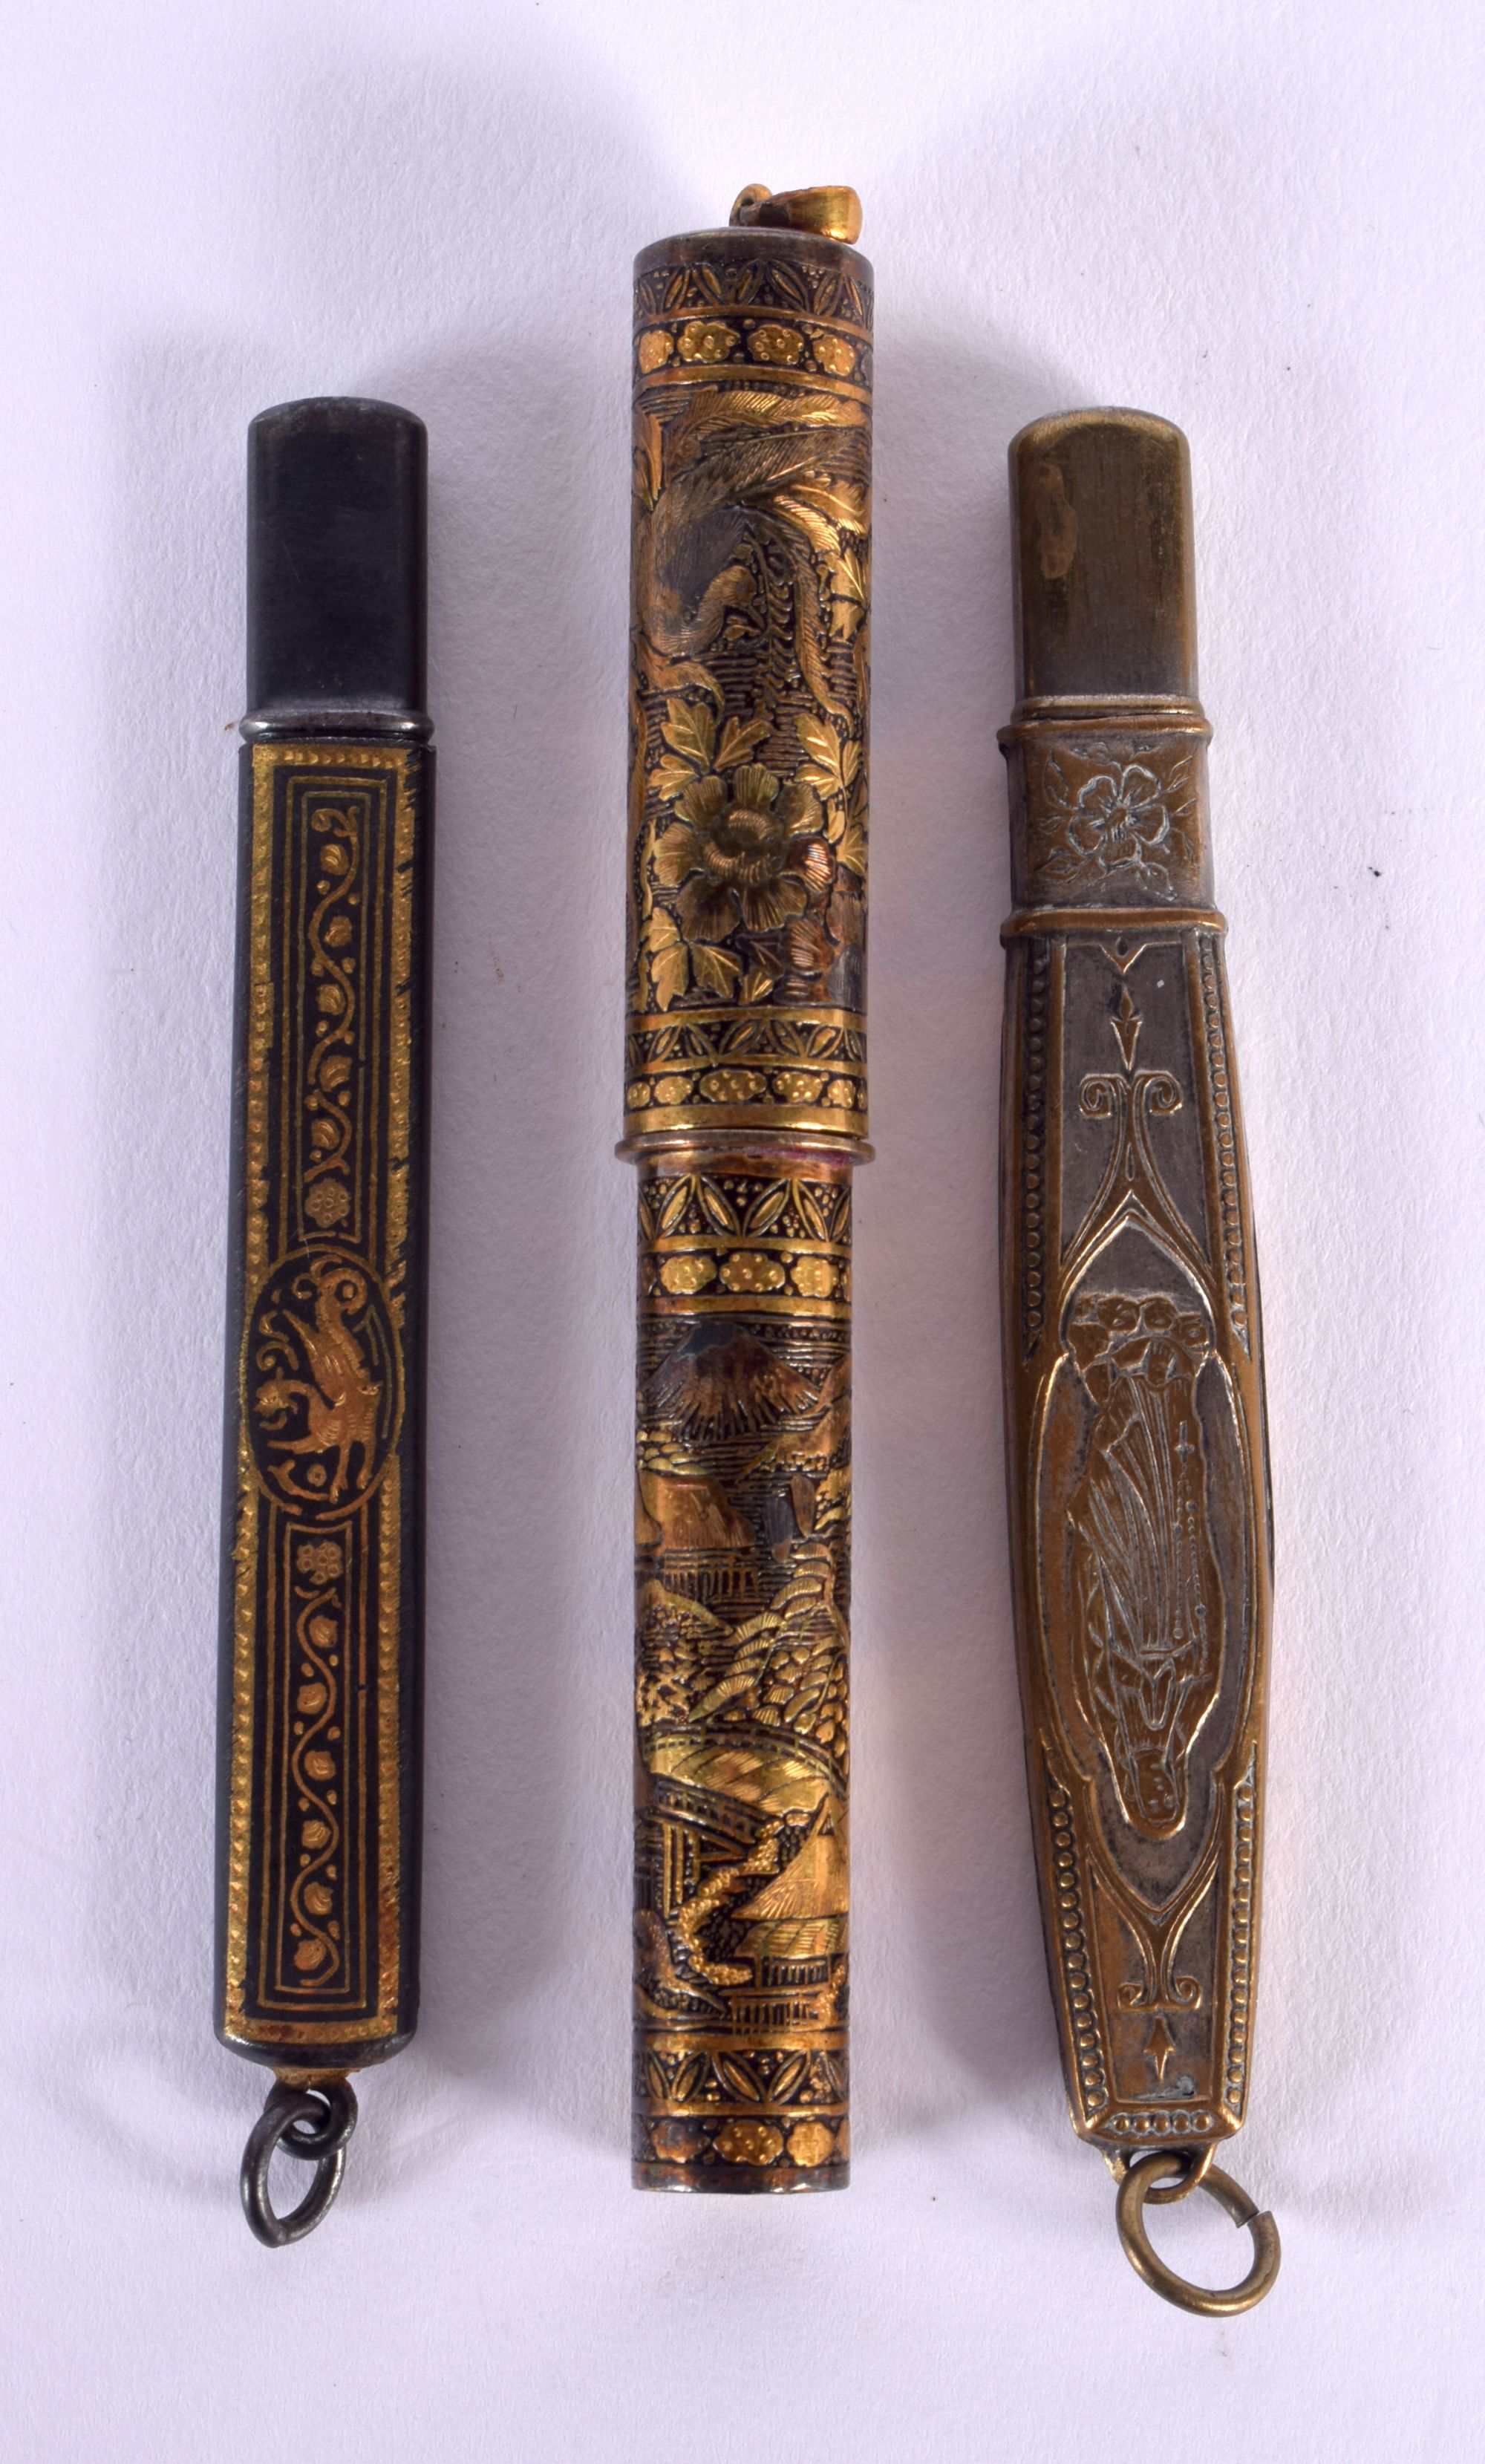 AN EARLY 20TH CENTURY JAPANESE MEIJI PERIOD MIXED METAL LEAD PENCIL HOLDER together with two others. - Image 2 of 3